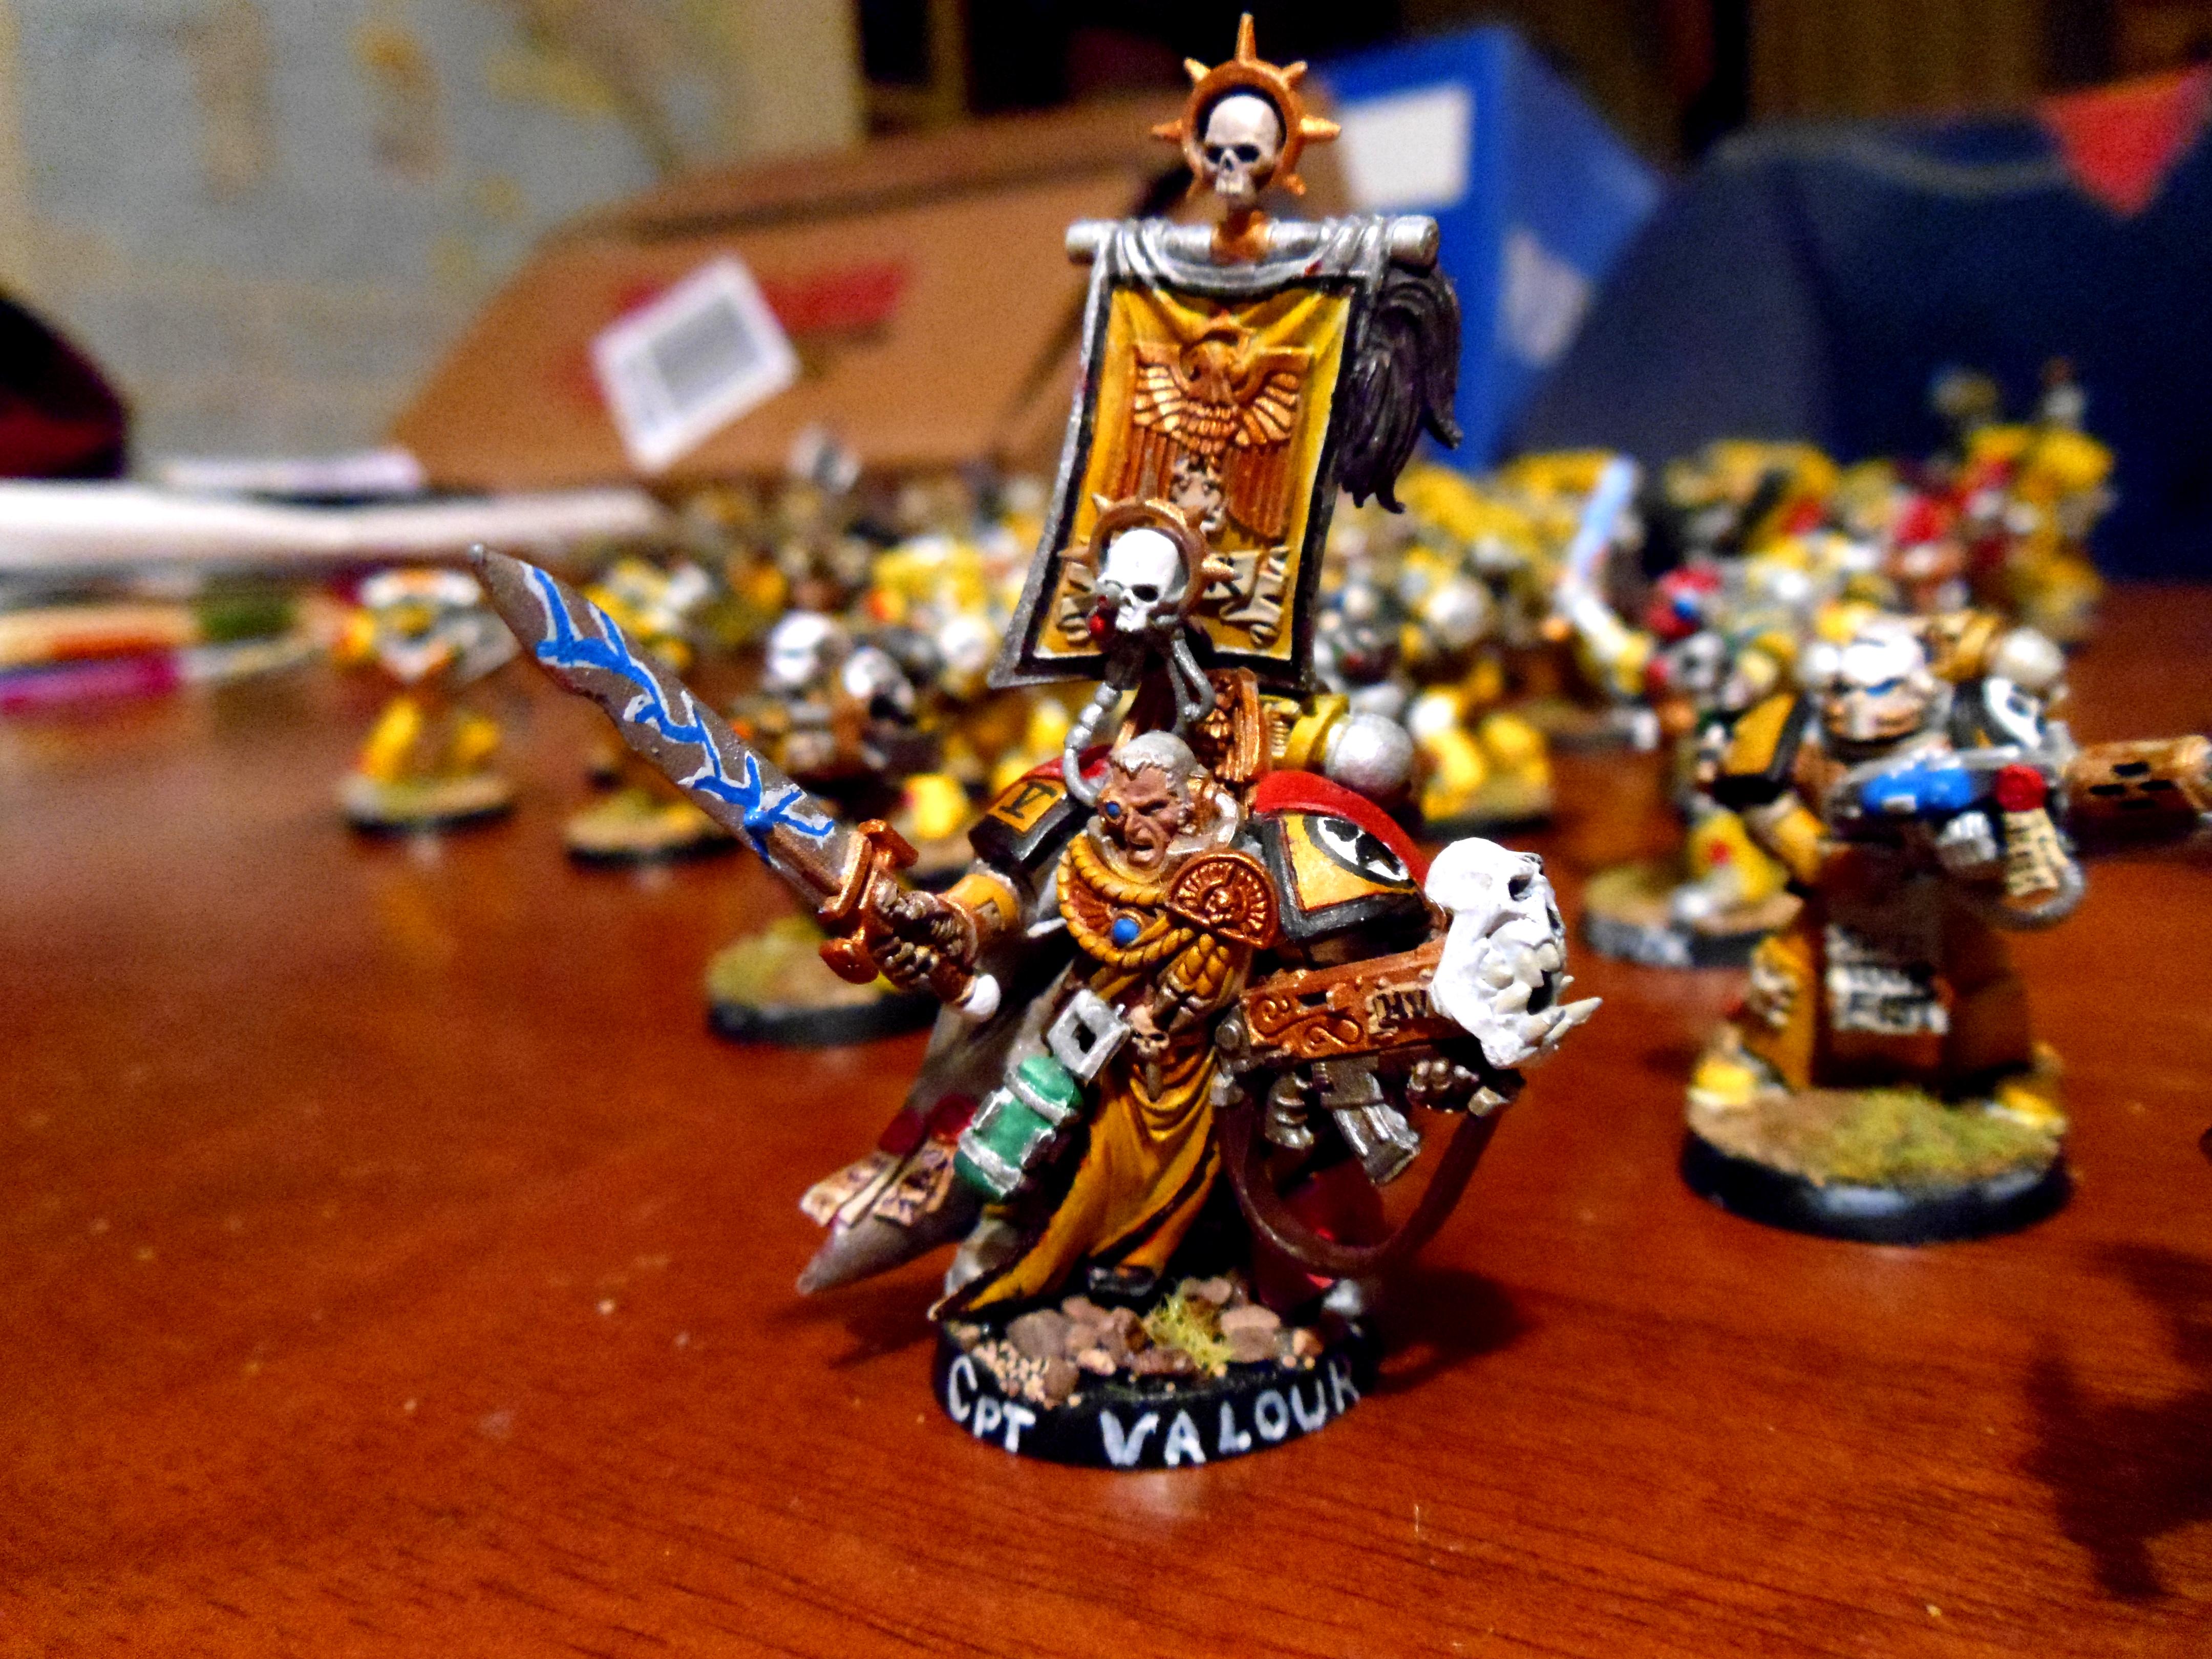 Imperial Fists, Cpt Hel Valour 5/13/12